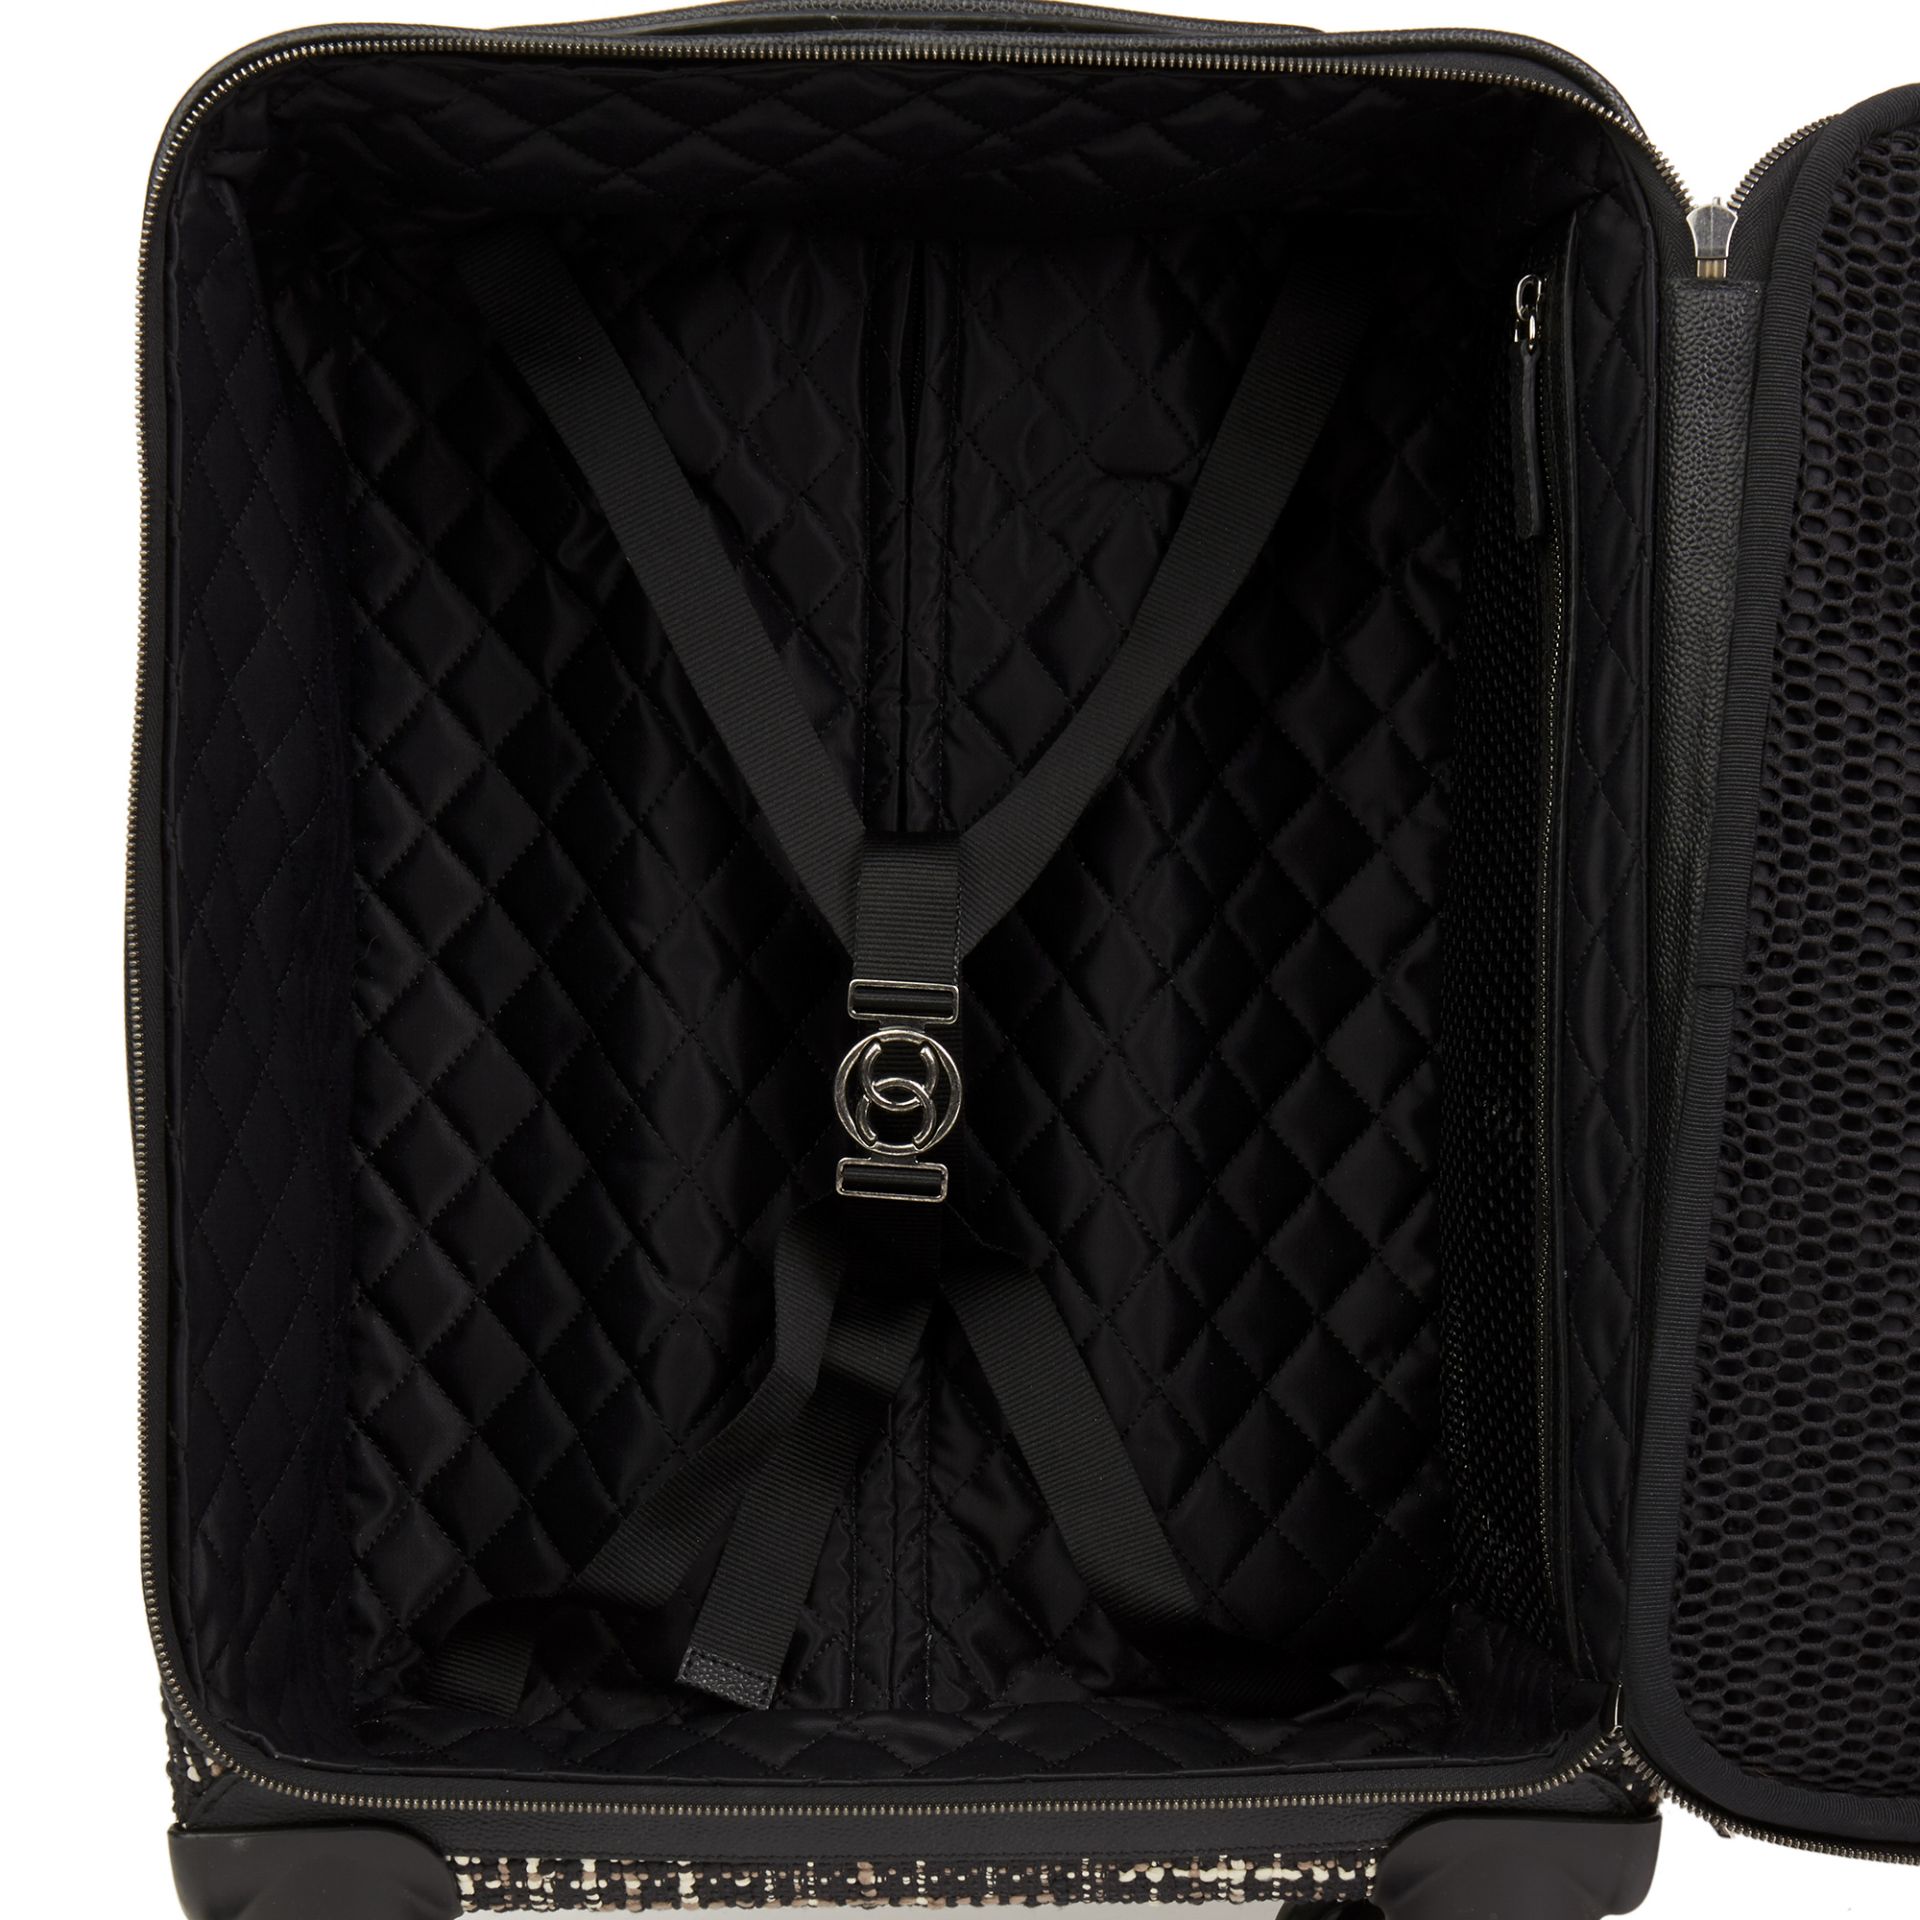 Chanel Jacket Trolley Rolling Suitcase - Image 6 of 13